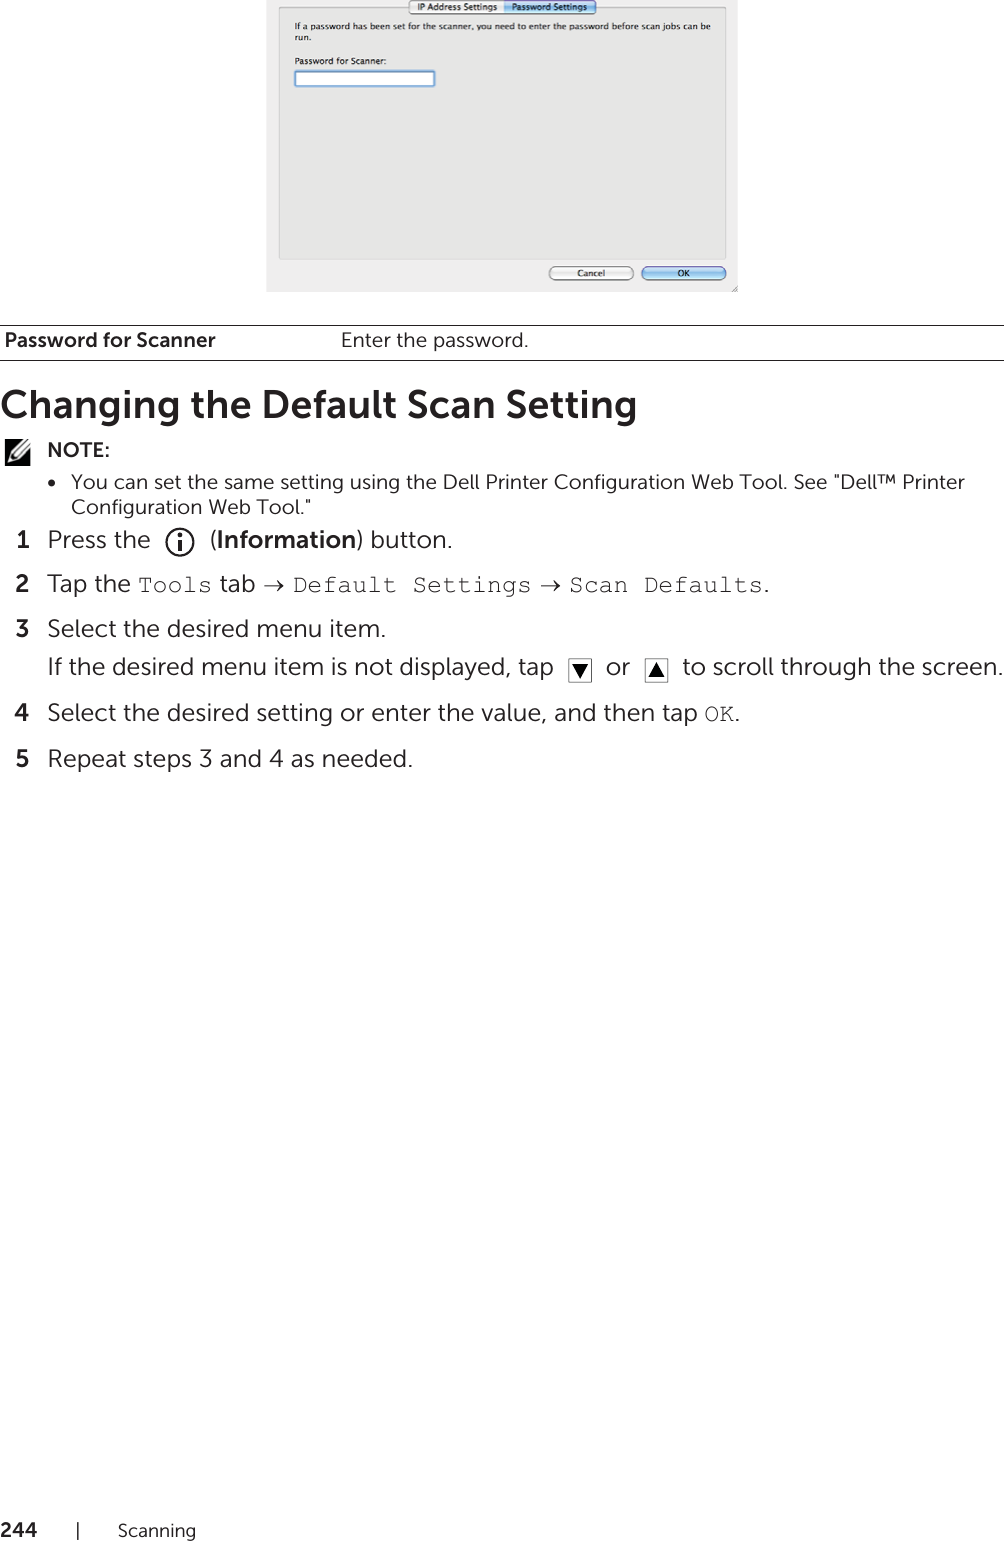 244|ScanningChanging the Default Scan SettingNOTE:•You can set the same setting using the Dell Printer Configuration Web Tool. See &quot;Dell™ Printer Configuration Web Tool.&quot;1Press the   (Information) button.2Tap the Tools tab   Default Settings  Scan Defaults.3Select the desired menu item.If the desired menu item is not displayed, tap   or   to scroll through the screen.4Select the desired setting or enter the value, and then tap OK.5Repeat steps 3 and 4 as needed.Password for Scanner Enter the password.